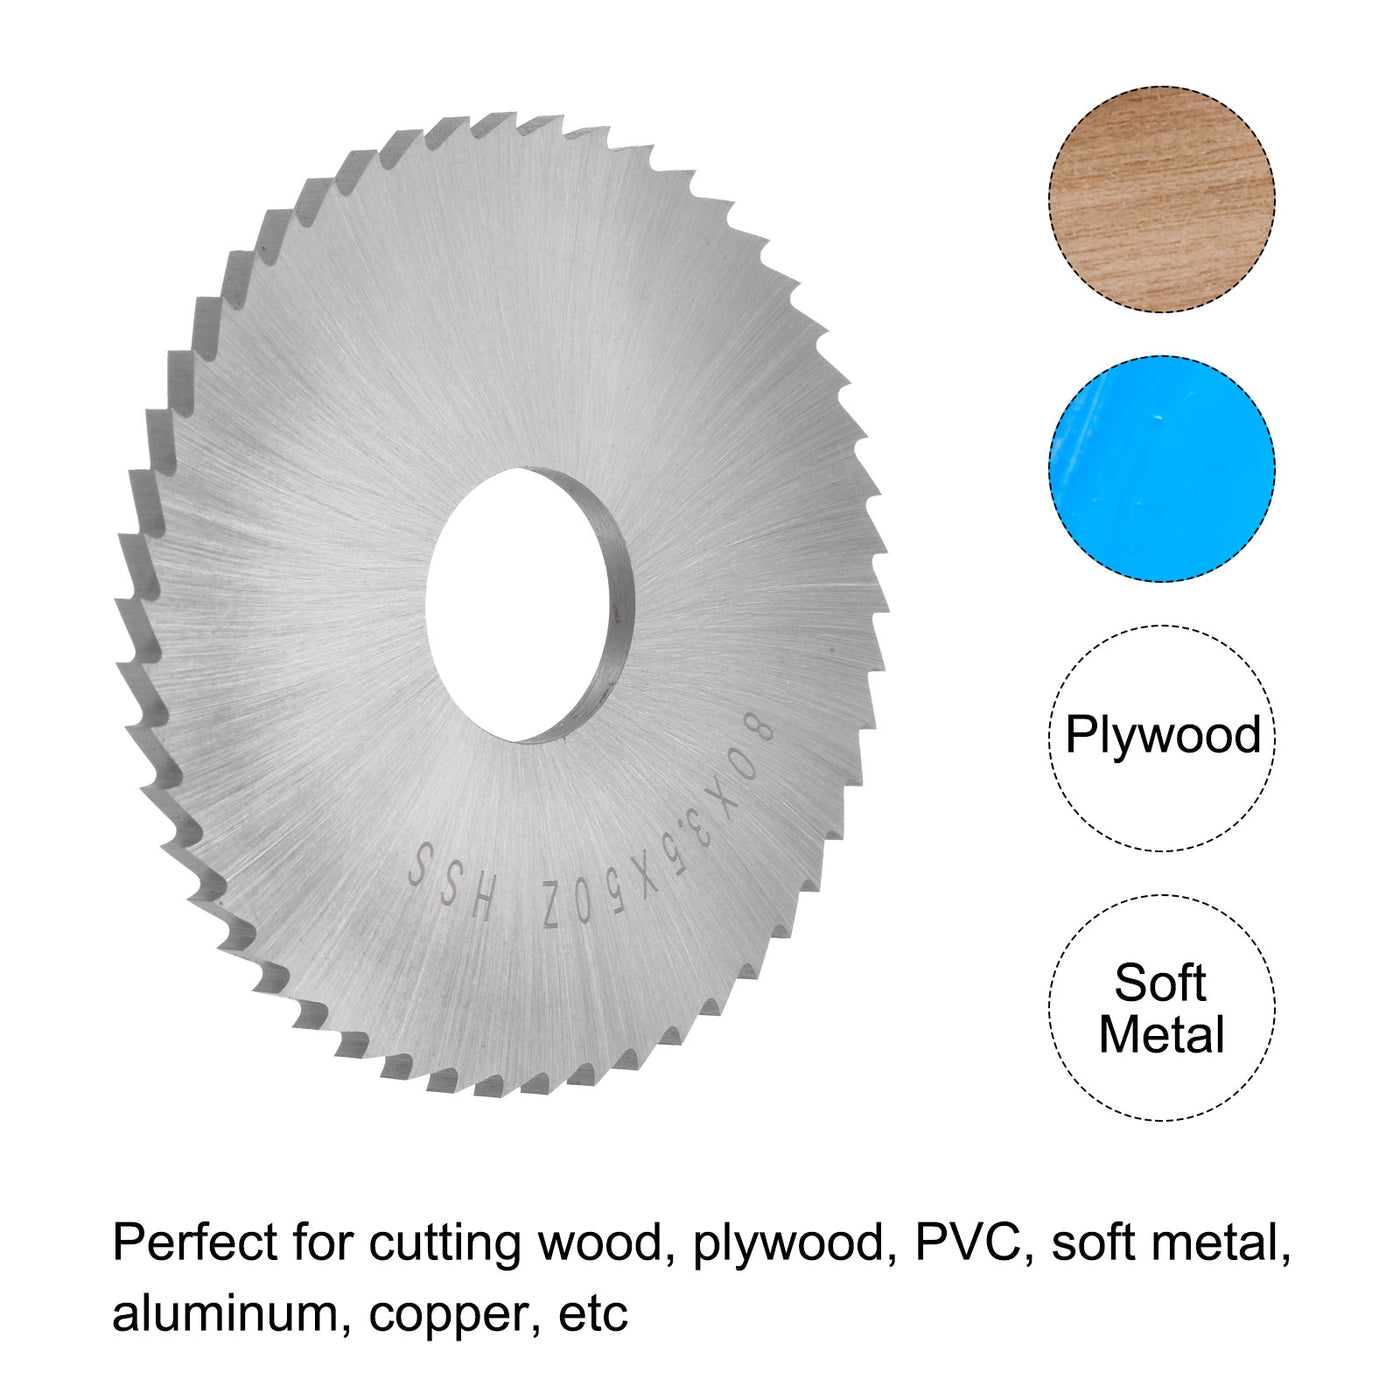 Uxcell Uxcell 75mm Dia 22mm Arbor 5mm Thick 50 Tooth High Speed Steel Circular Saw Blade